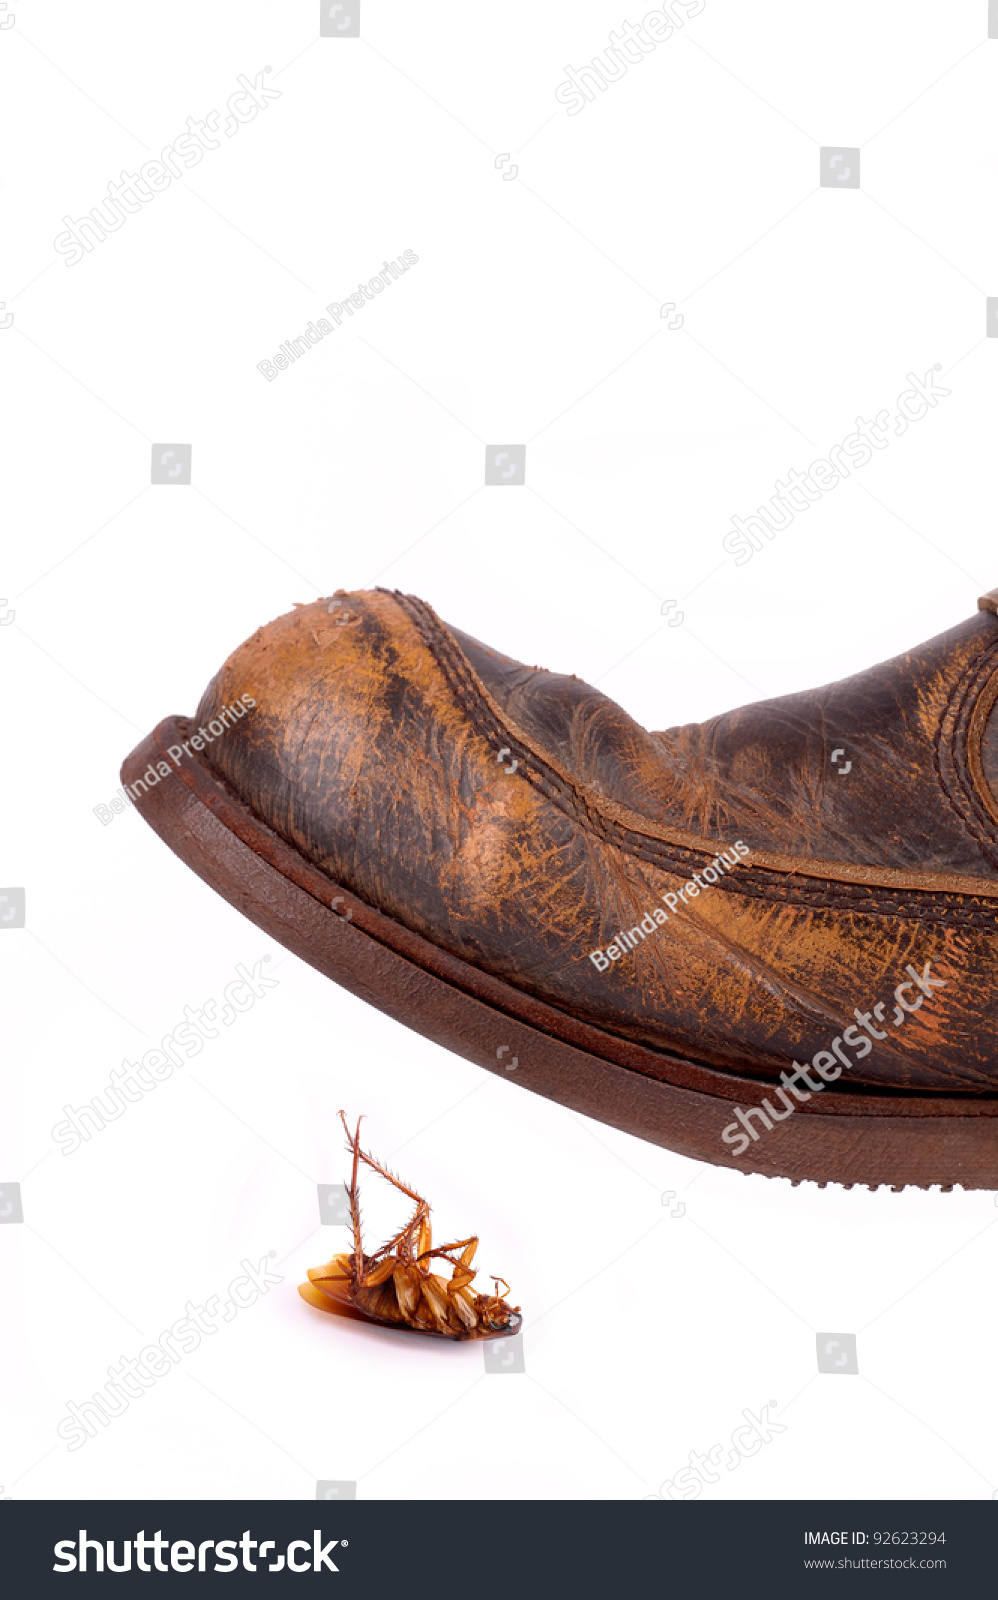 Leather Boot Ready To Trample Cockroach Stock Photo 92623294 : Shutterstock